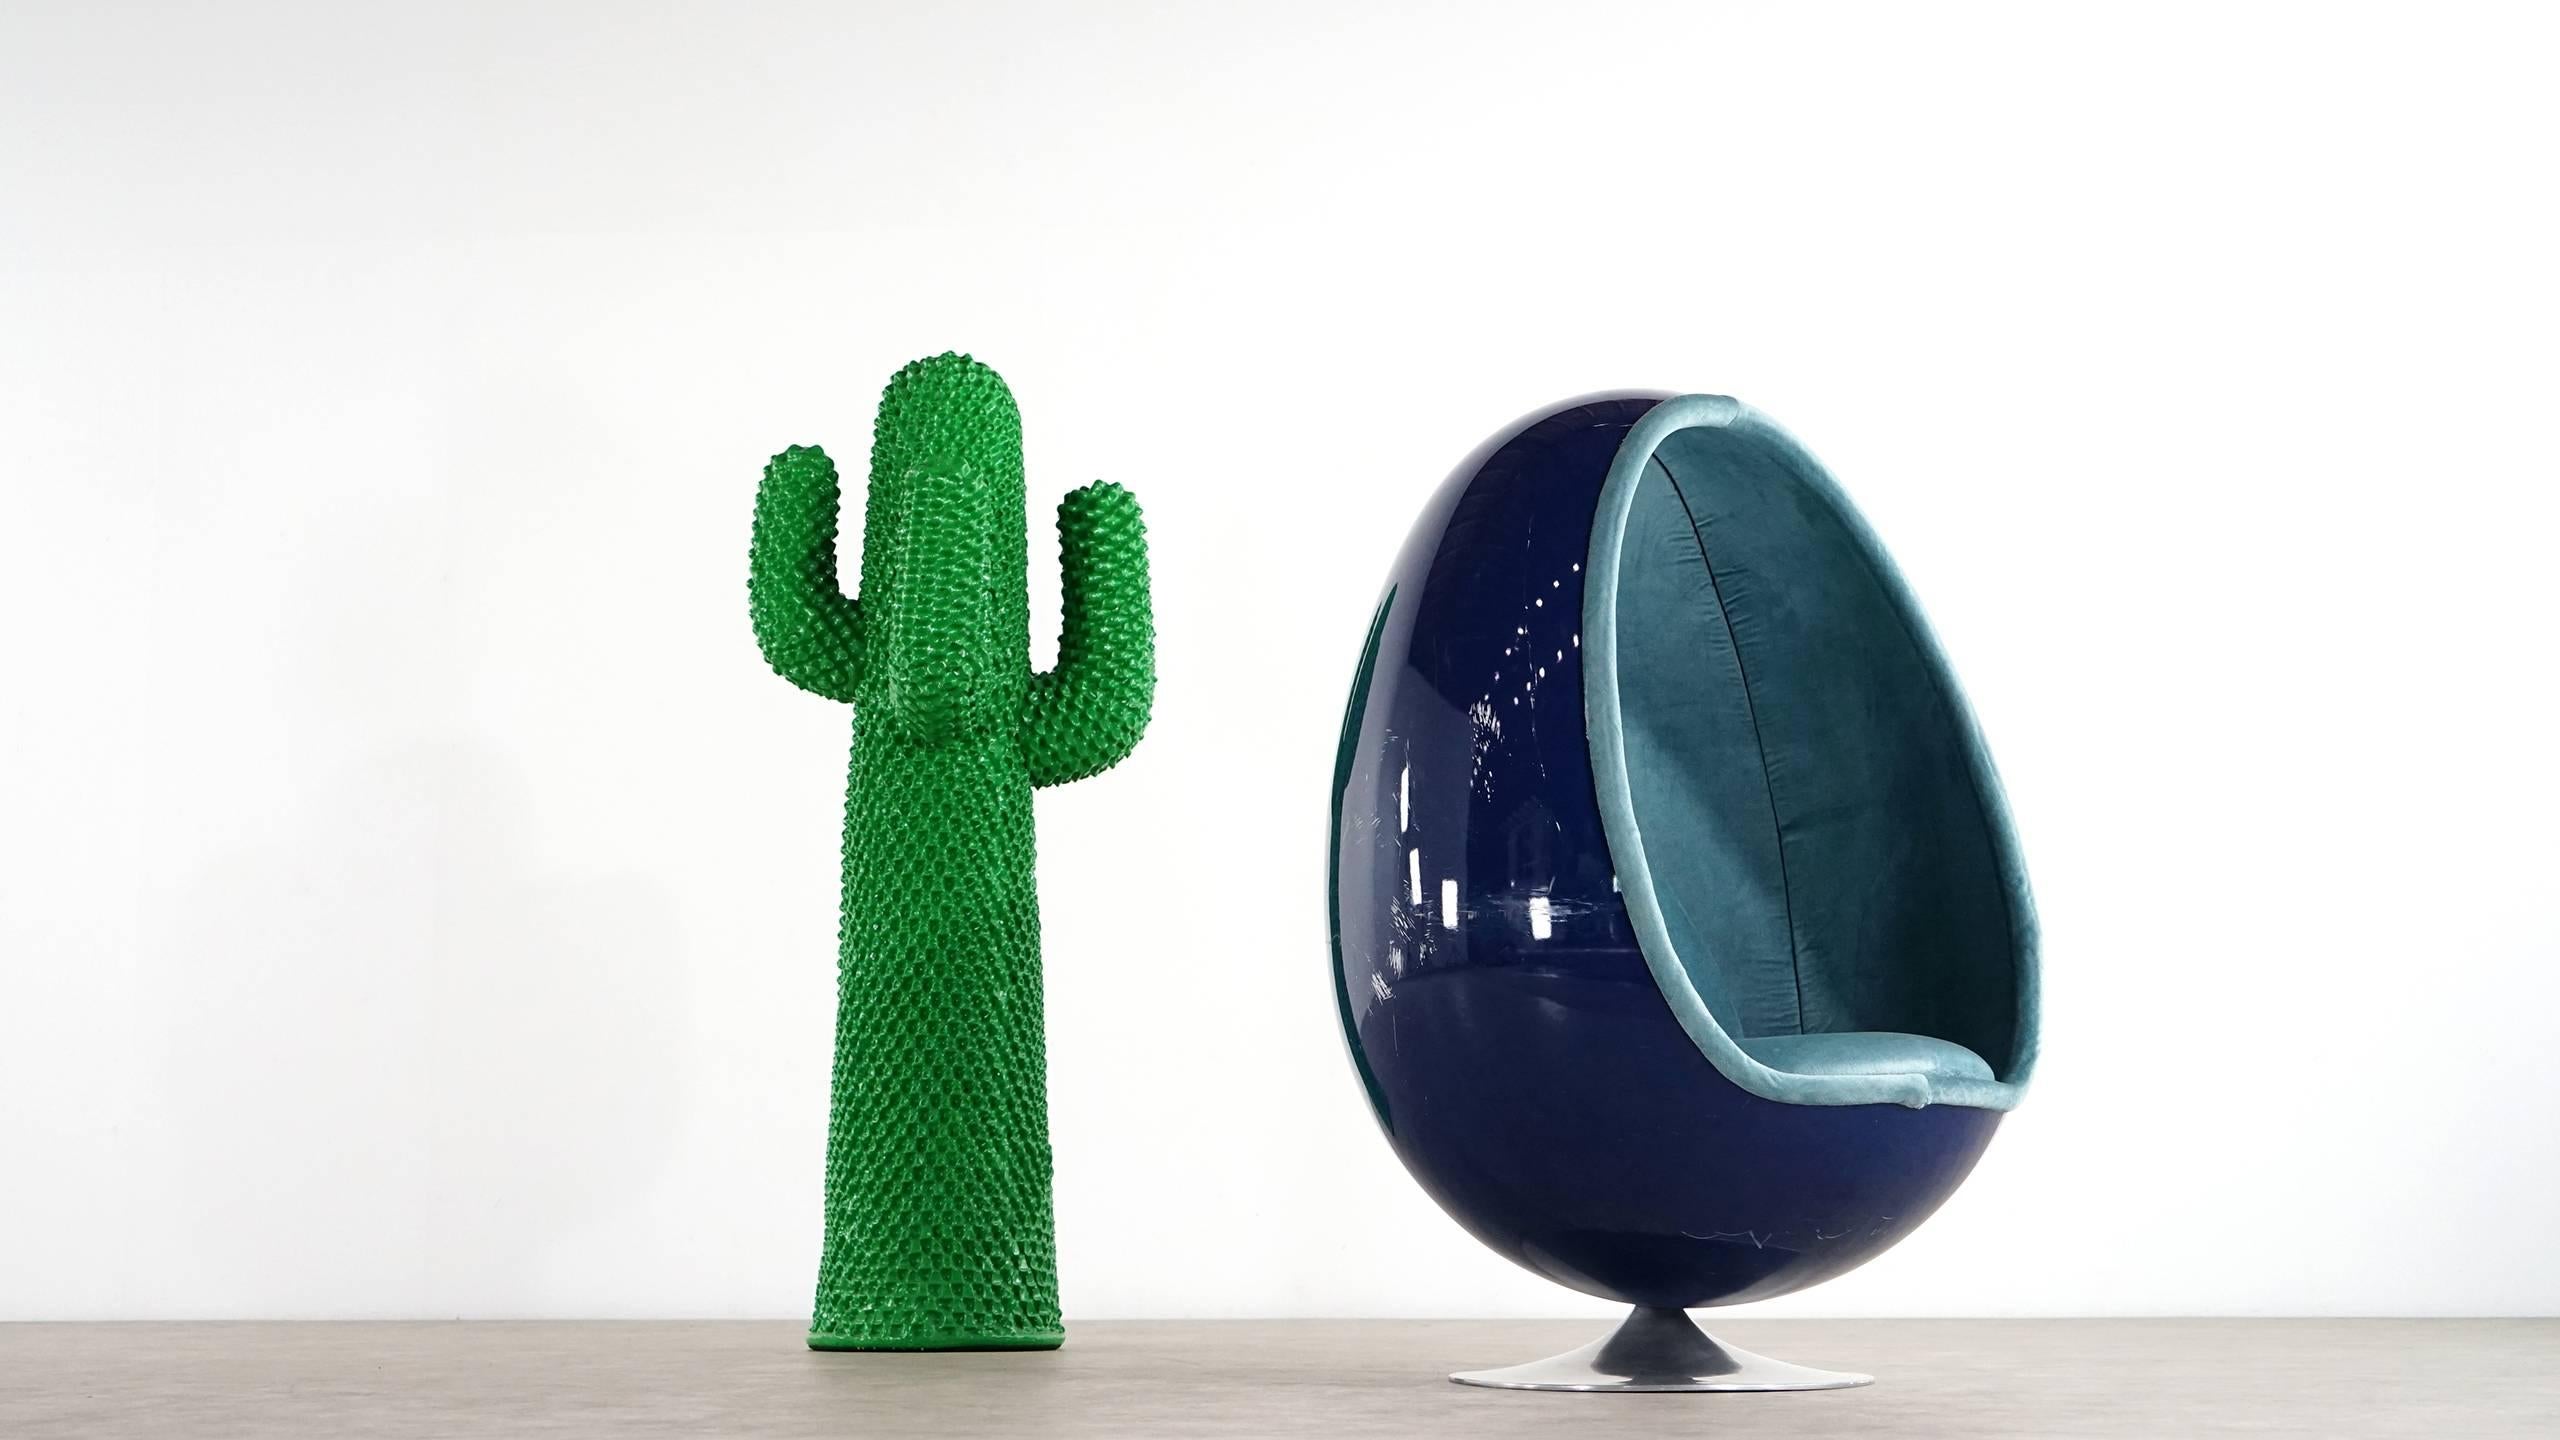 Amazing Ovalia Egg chair designed in late 1960s by Henrik Thor-Larsen. The chair has its original upholstery. Base is made of aluminium and shell is made of glass fibre coated in blue with some scratches.